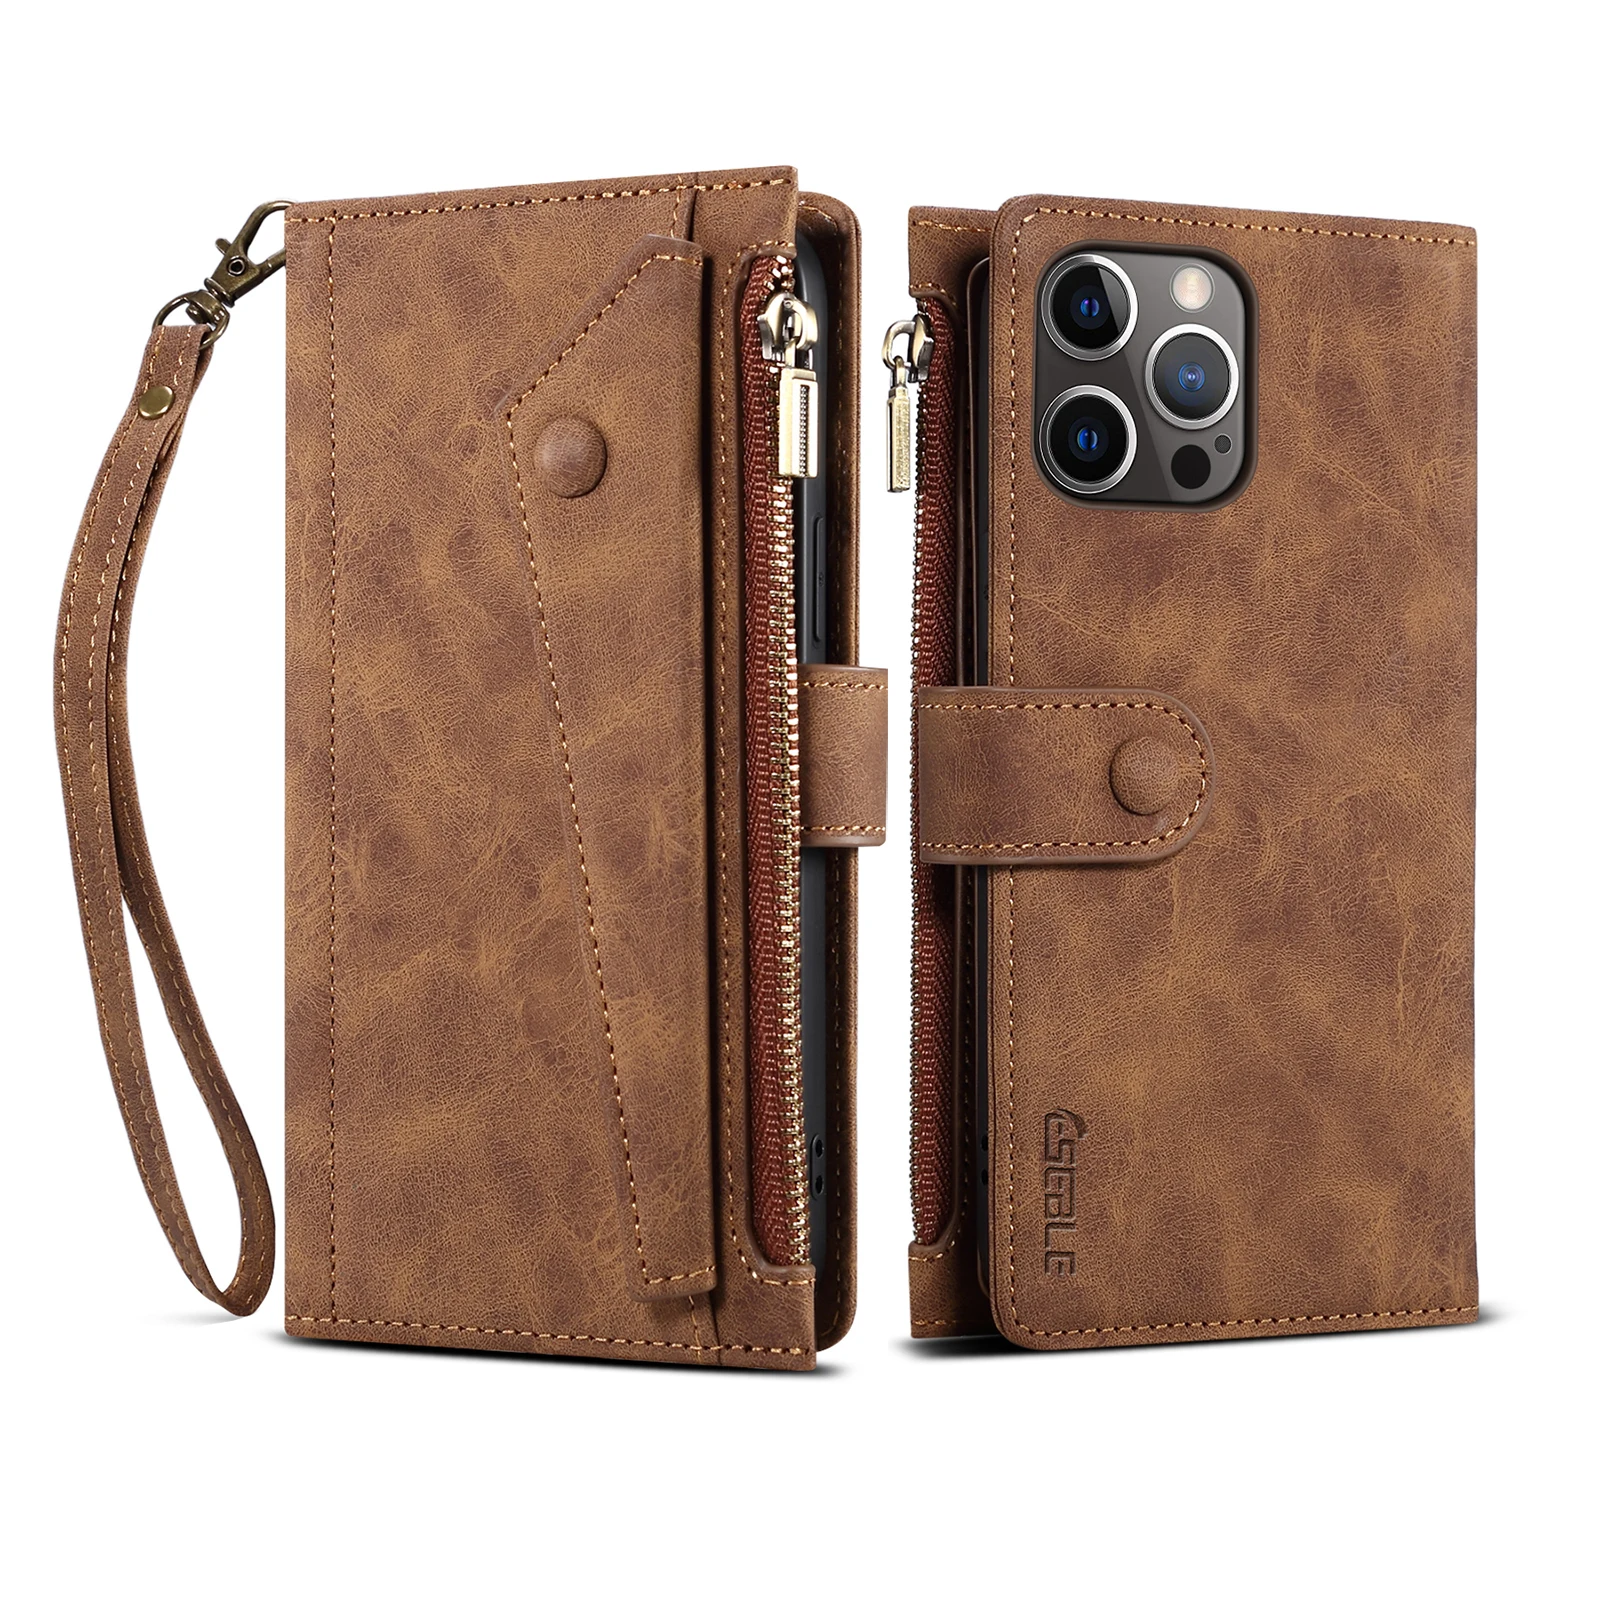 Luxury Leather Wallet Case Crossbody Phone Bag For iPhone 13 Pro Max mini Lady Shoulder Strap Card Slot Magnetic Flip Book Cover